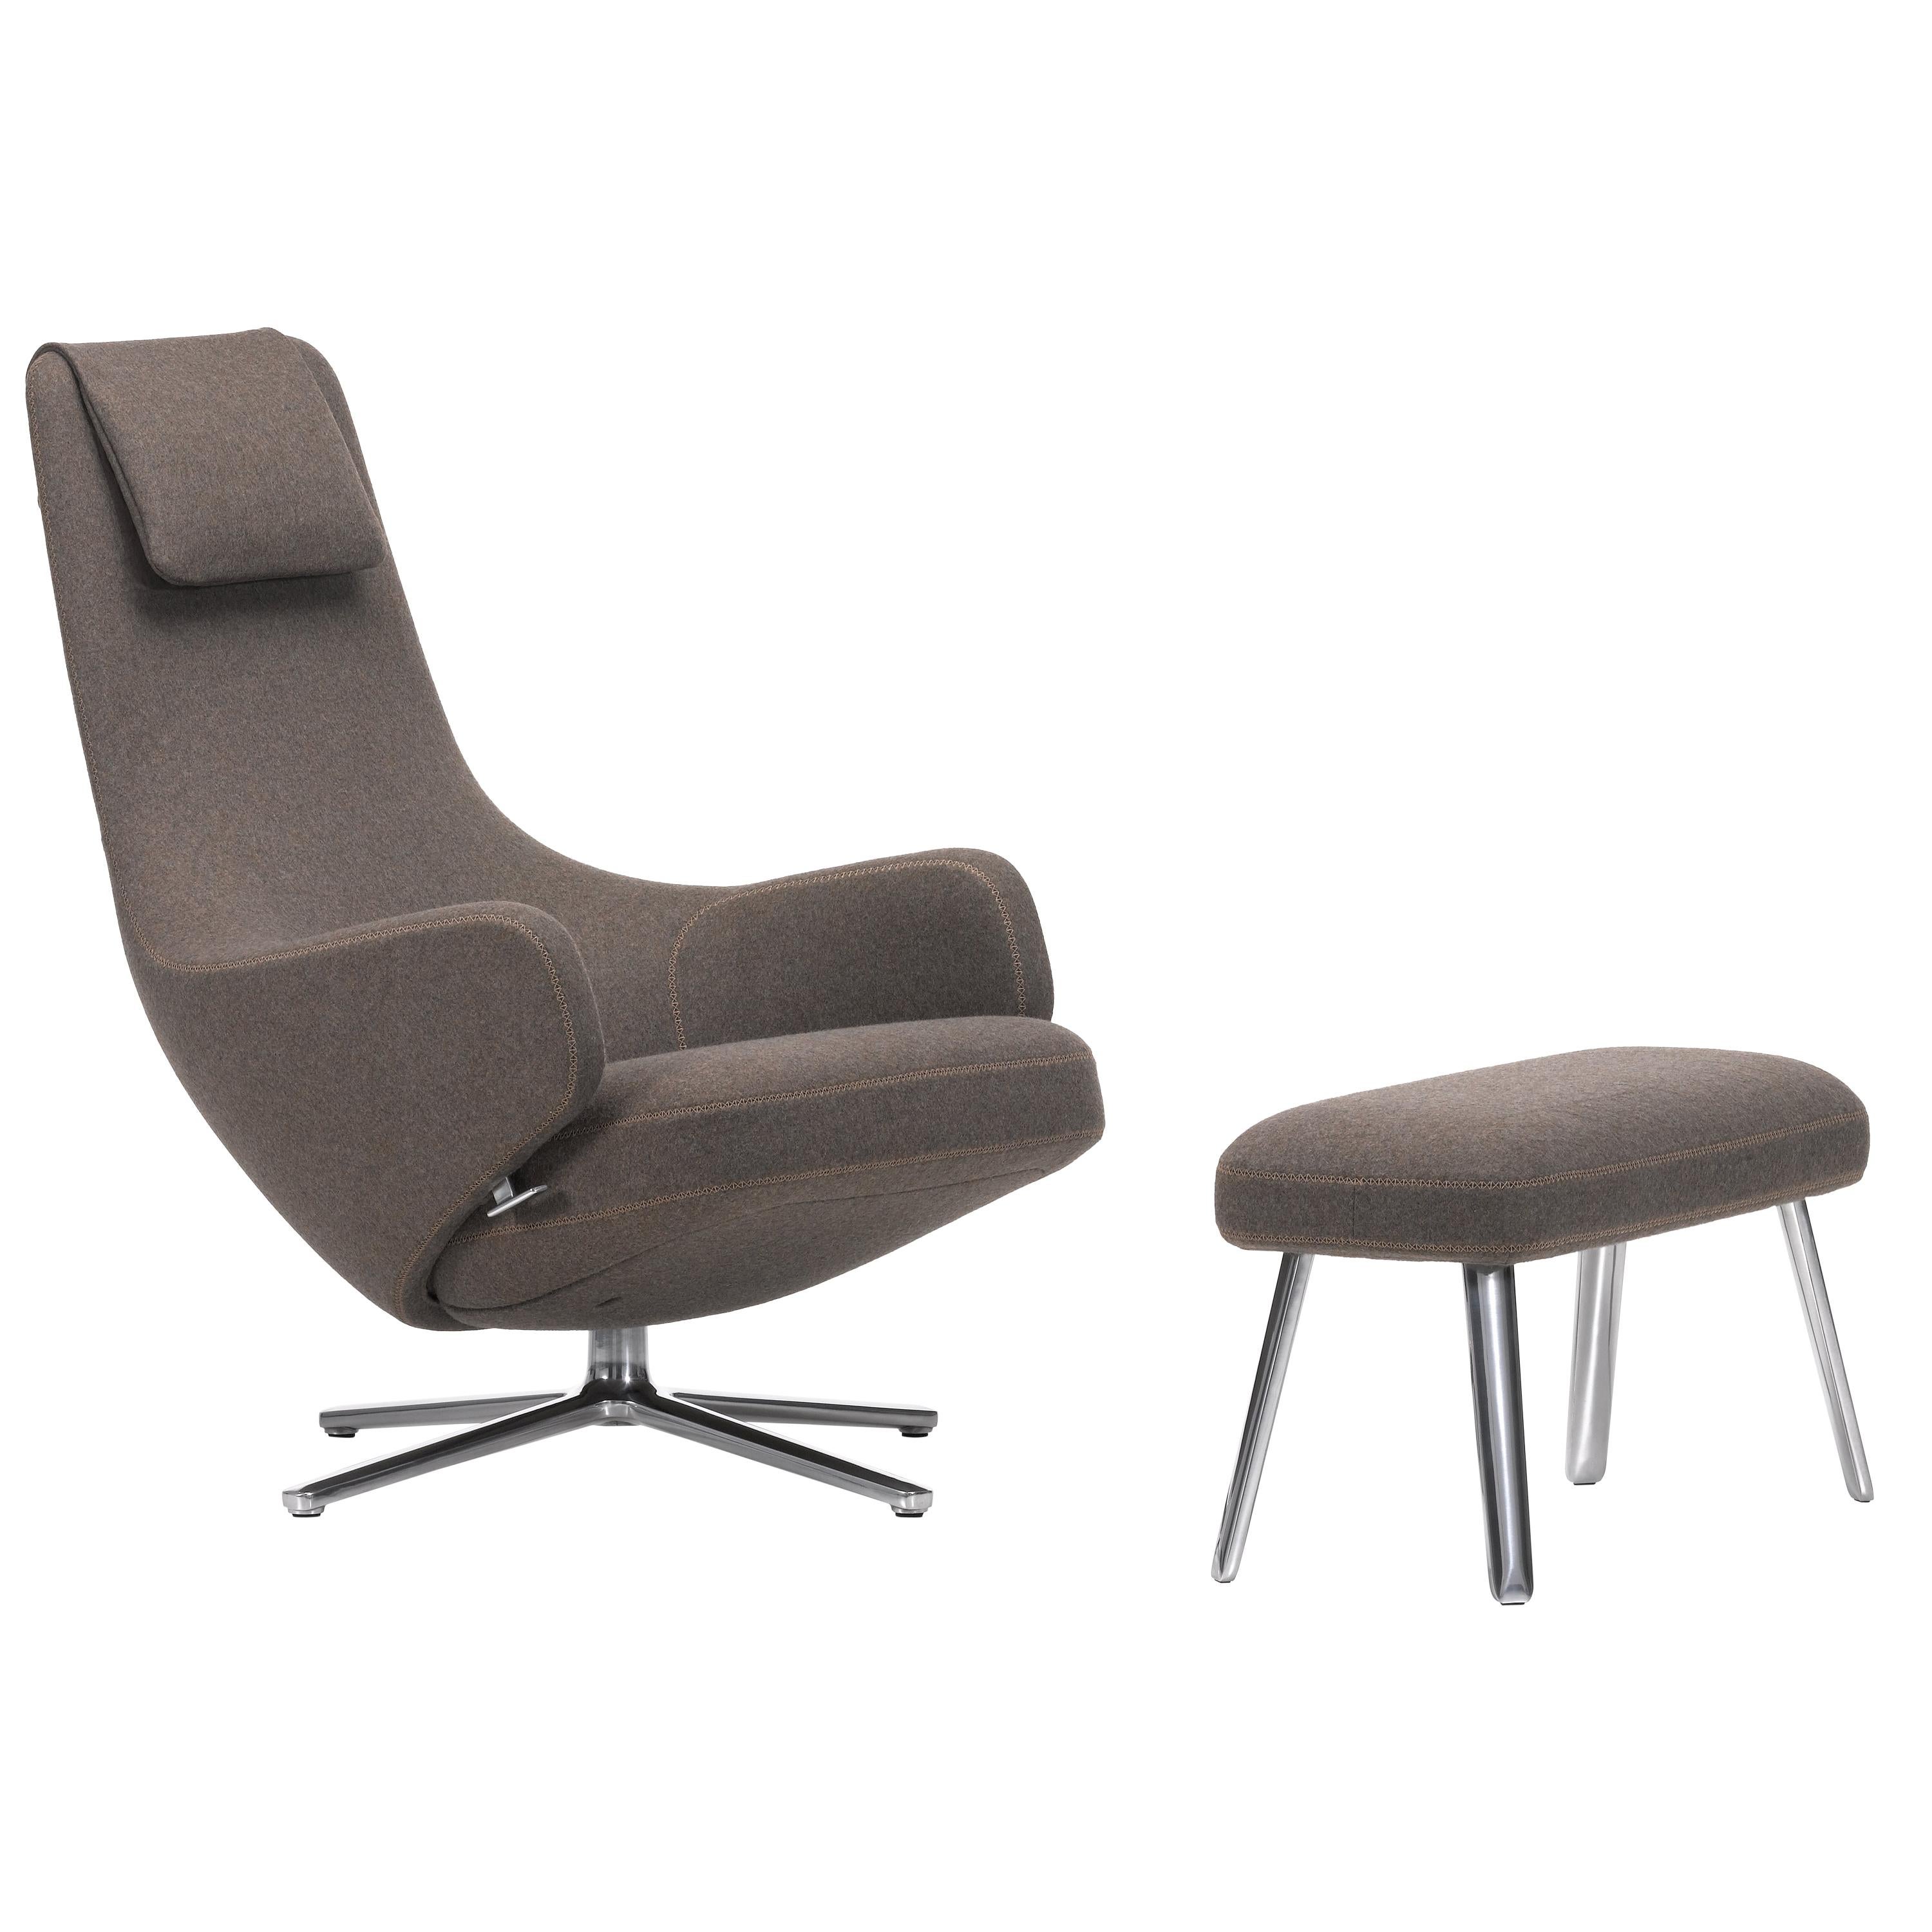 Vitra Repos & Panchina in Nutmeg Cosy2 by Antonio Citterio For Sale